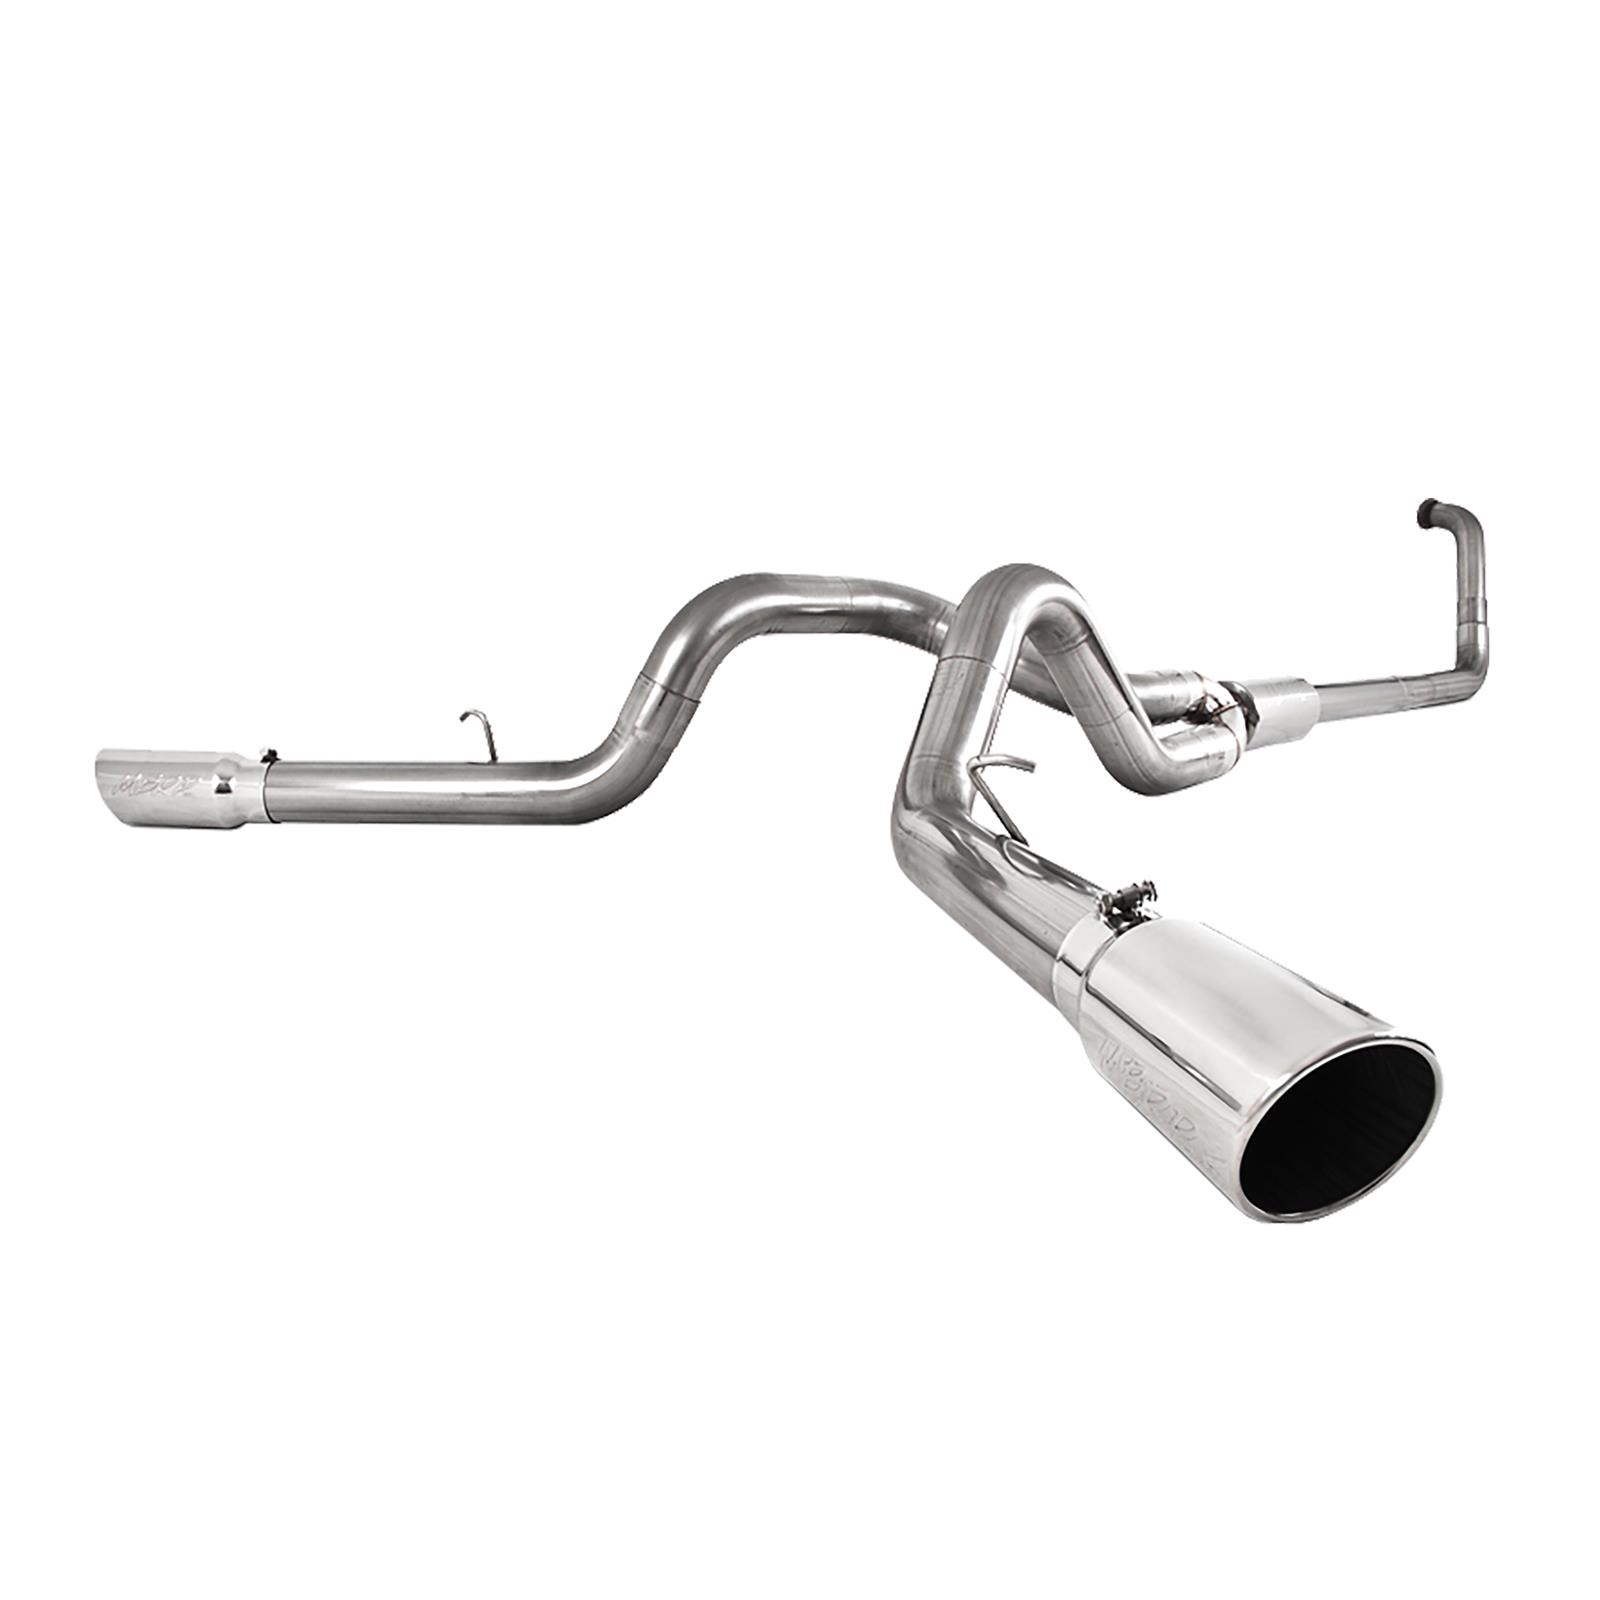 2005 FORD F 250 SUPER DUTY MBRP Performance Exhaust S6214409 MBRP XP